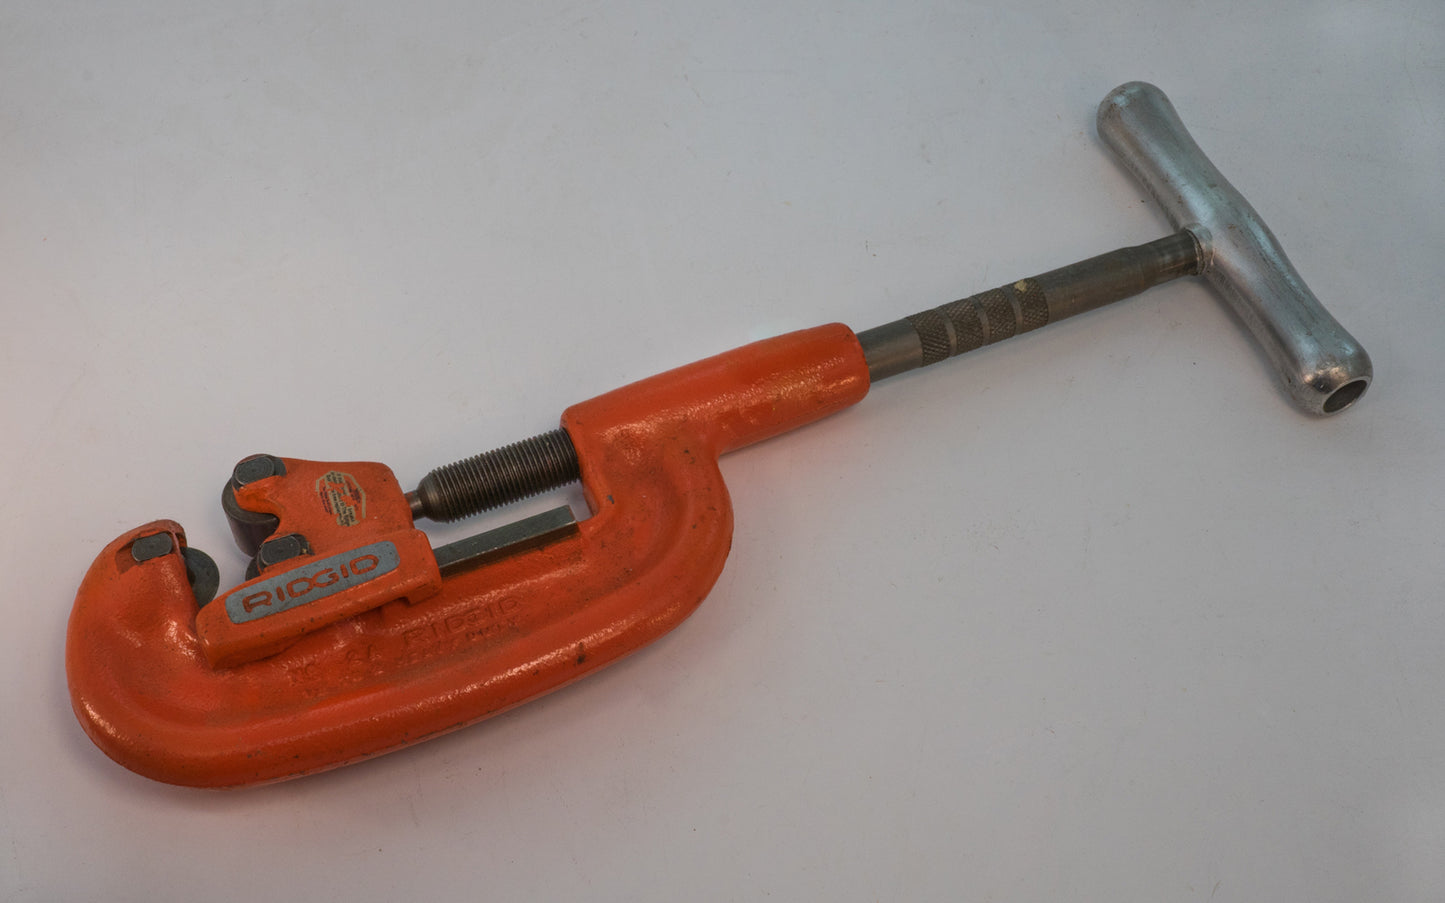 Rigid No. 2A Pipe Cutter. 1/8" to 2" Capacity. Made in USA. 